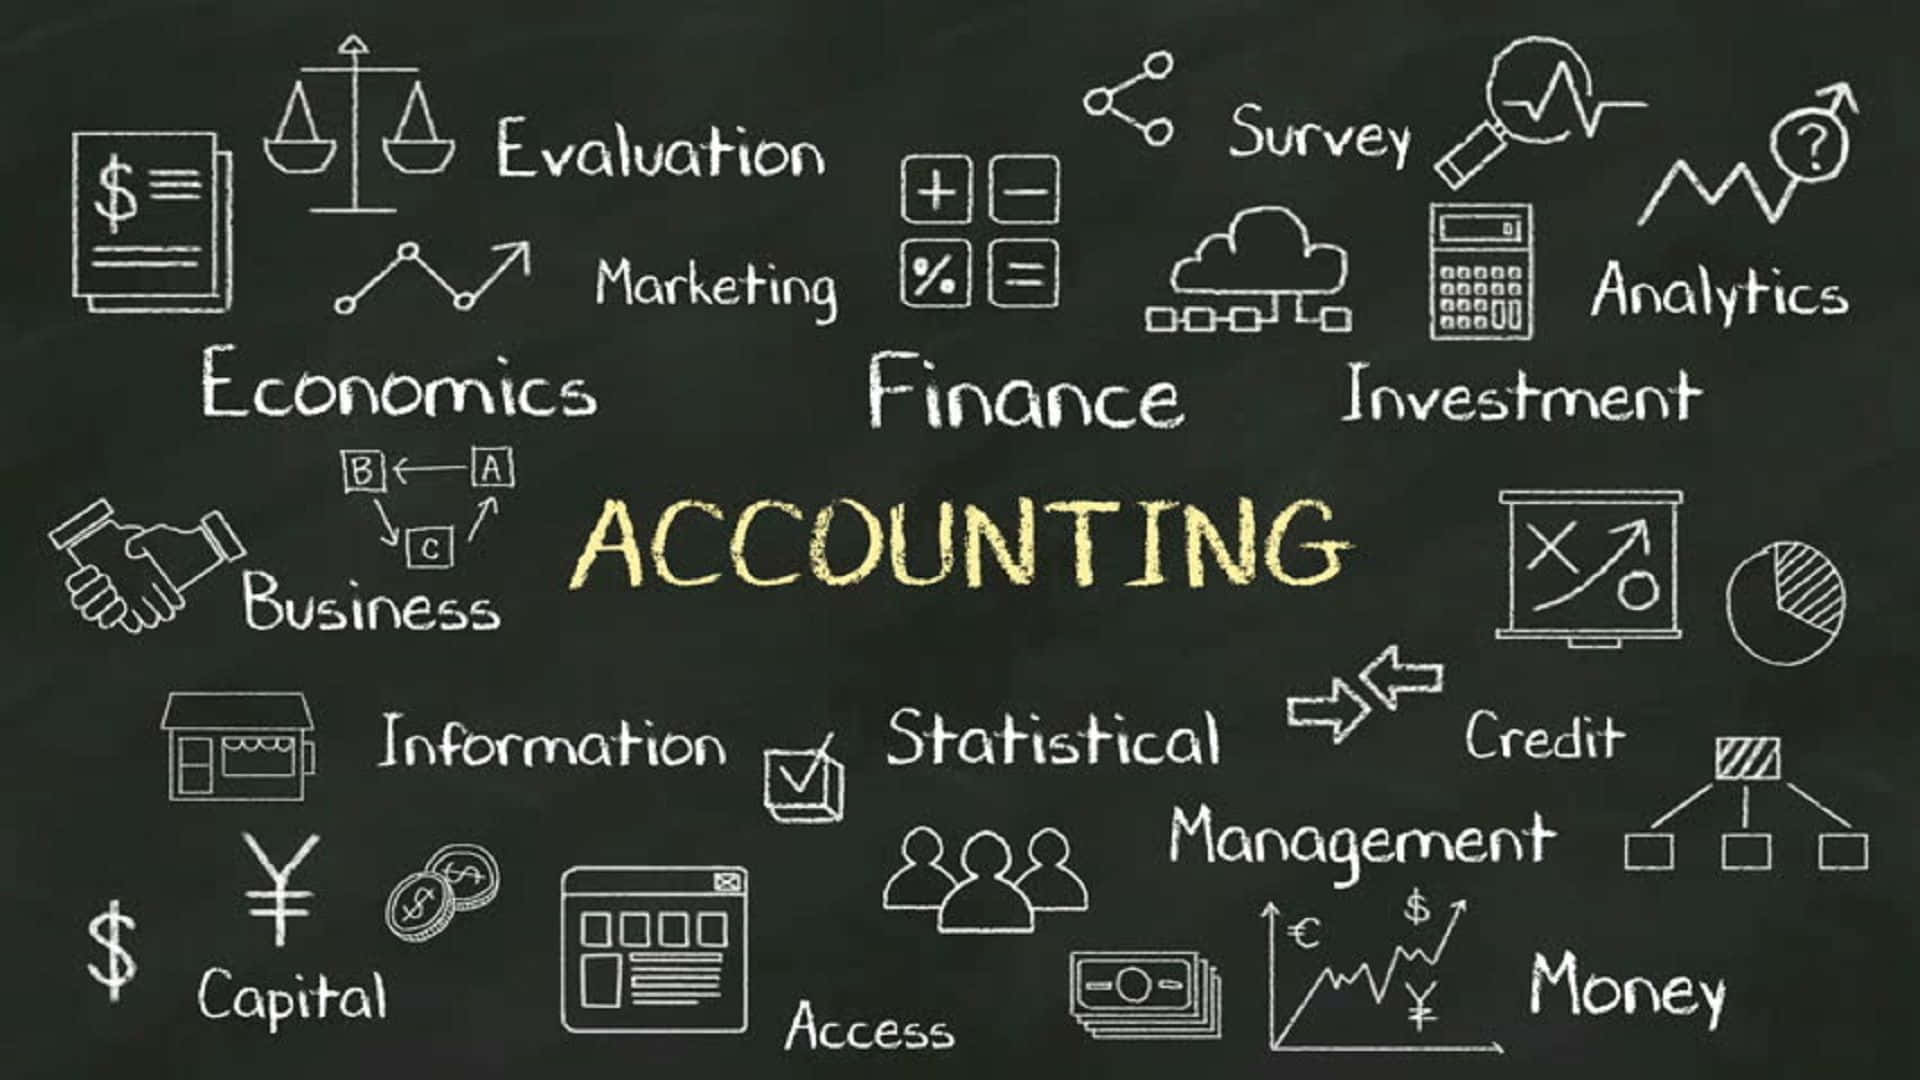 Accounting Icons On A Blackboard